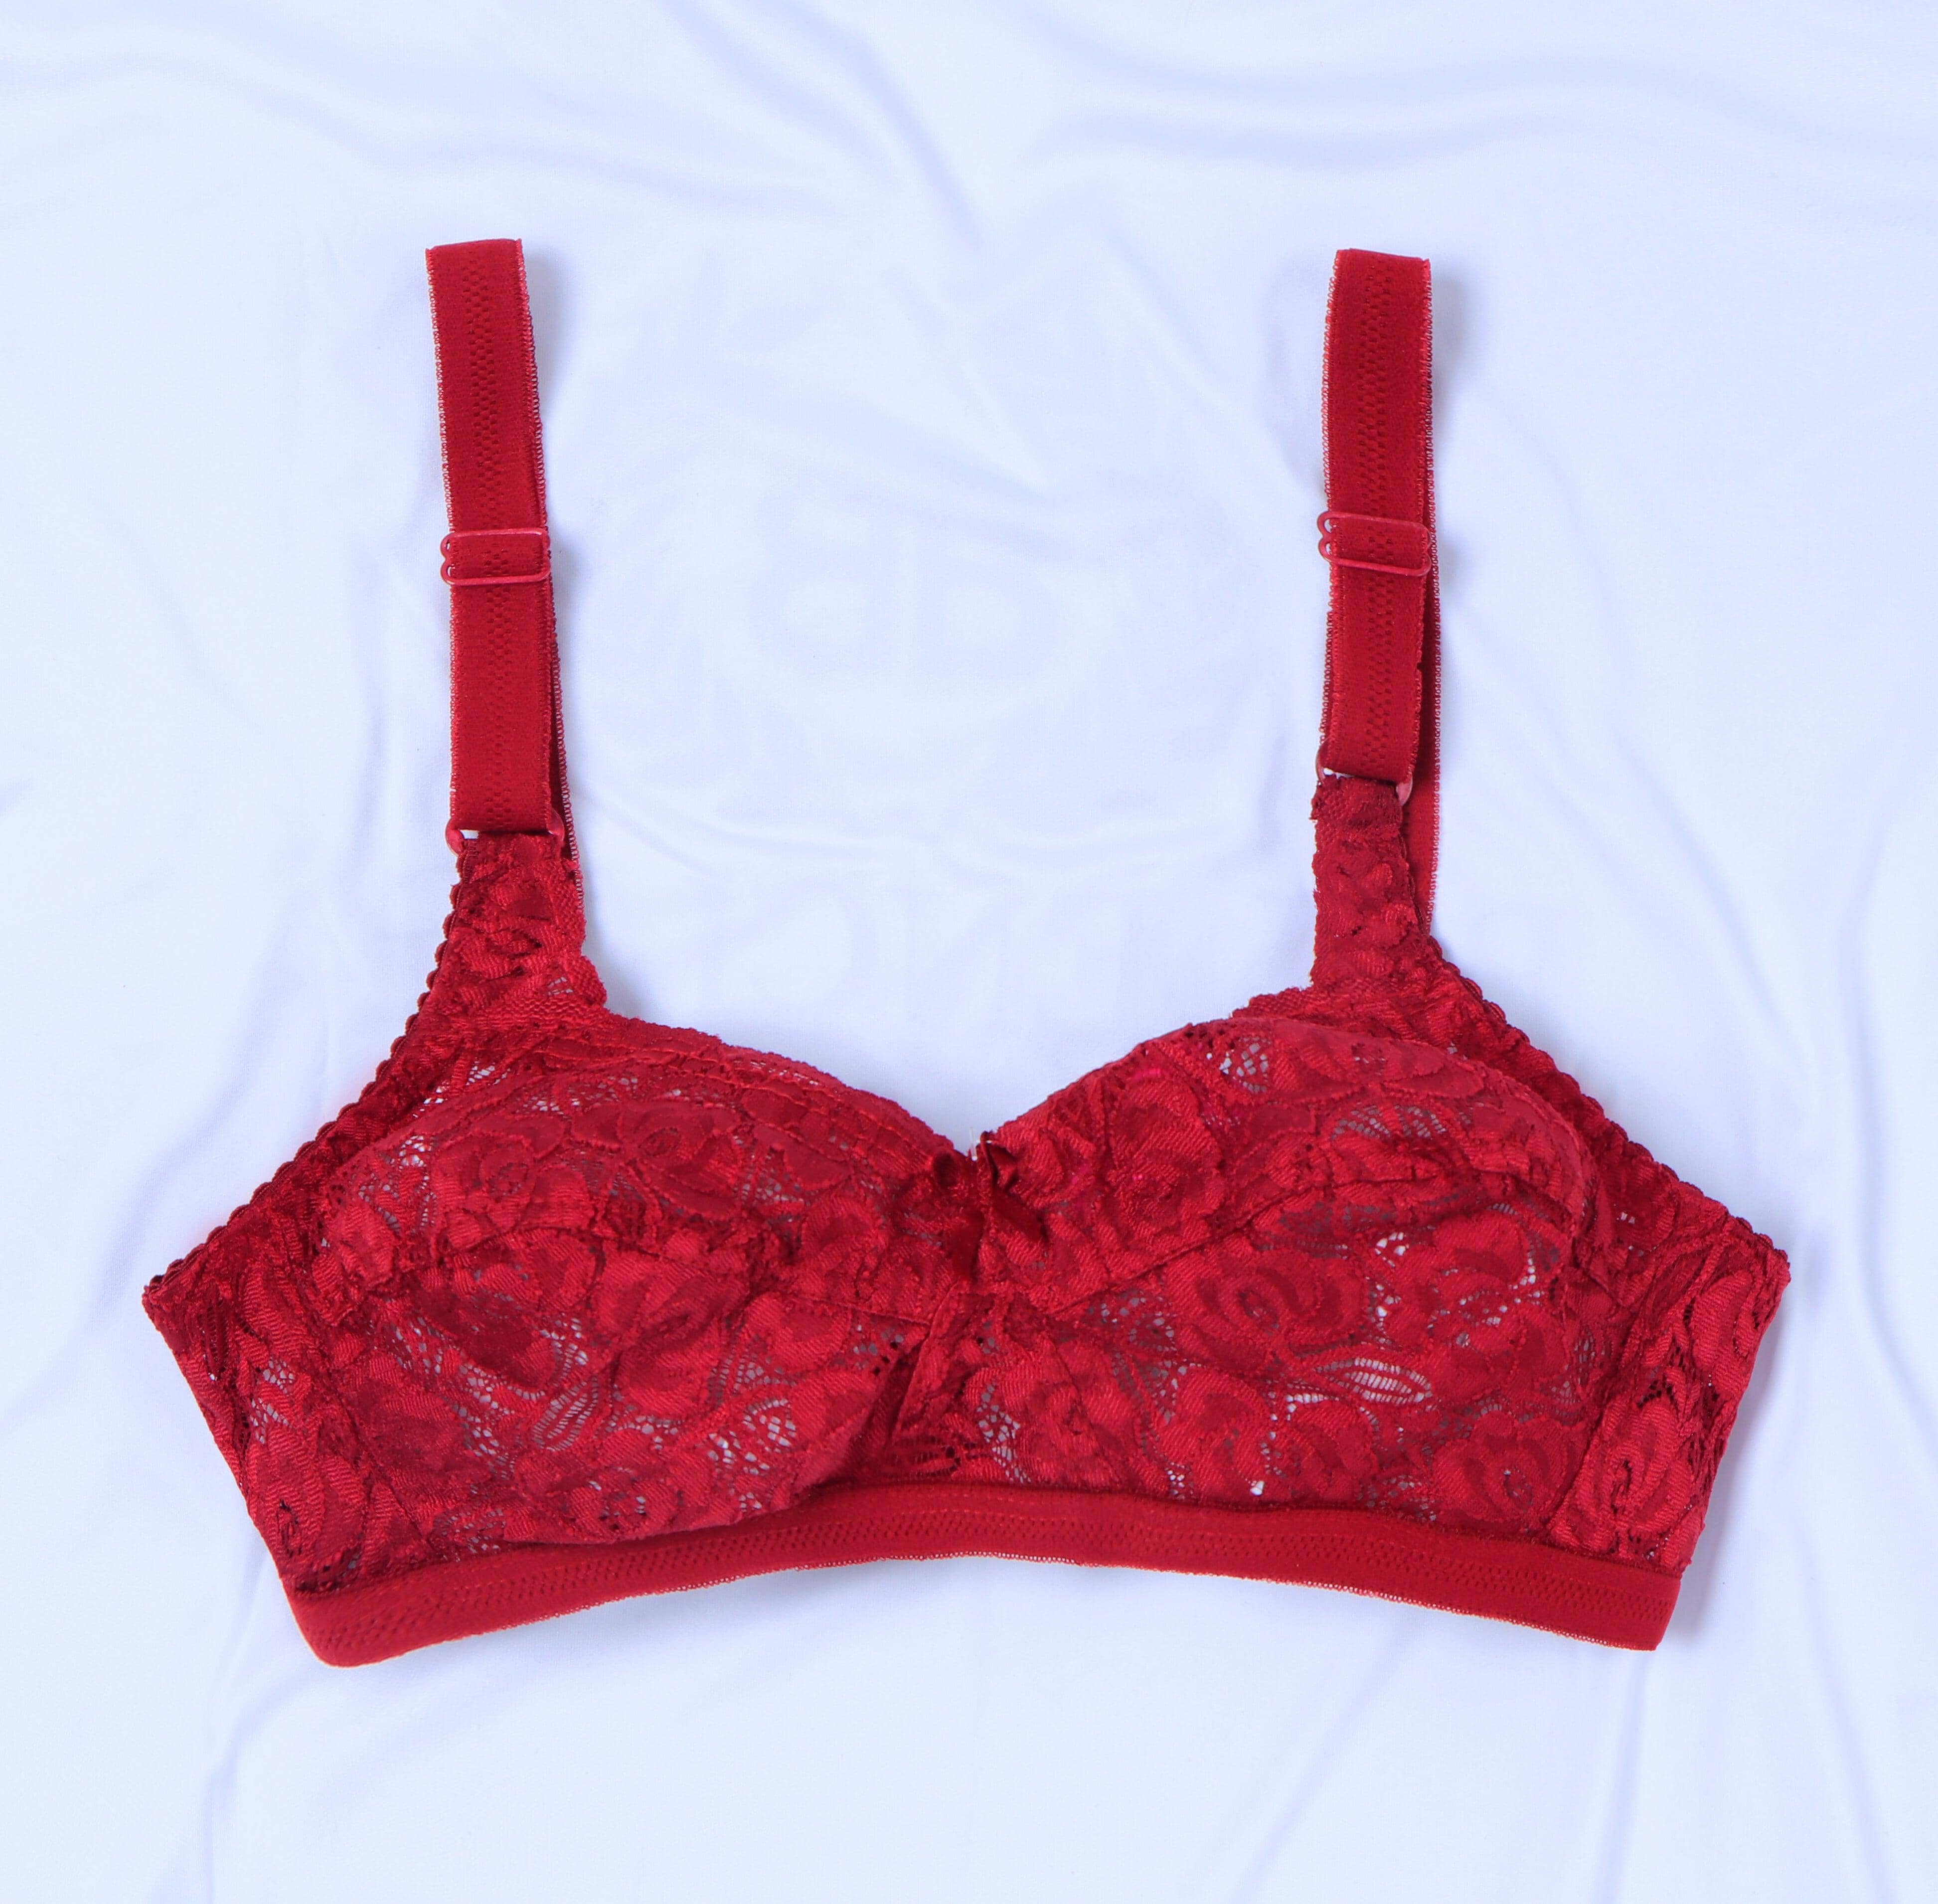 Espicopink  Lily - Softest Low Cut Floral Embroidered Cotton Bra